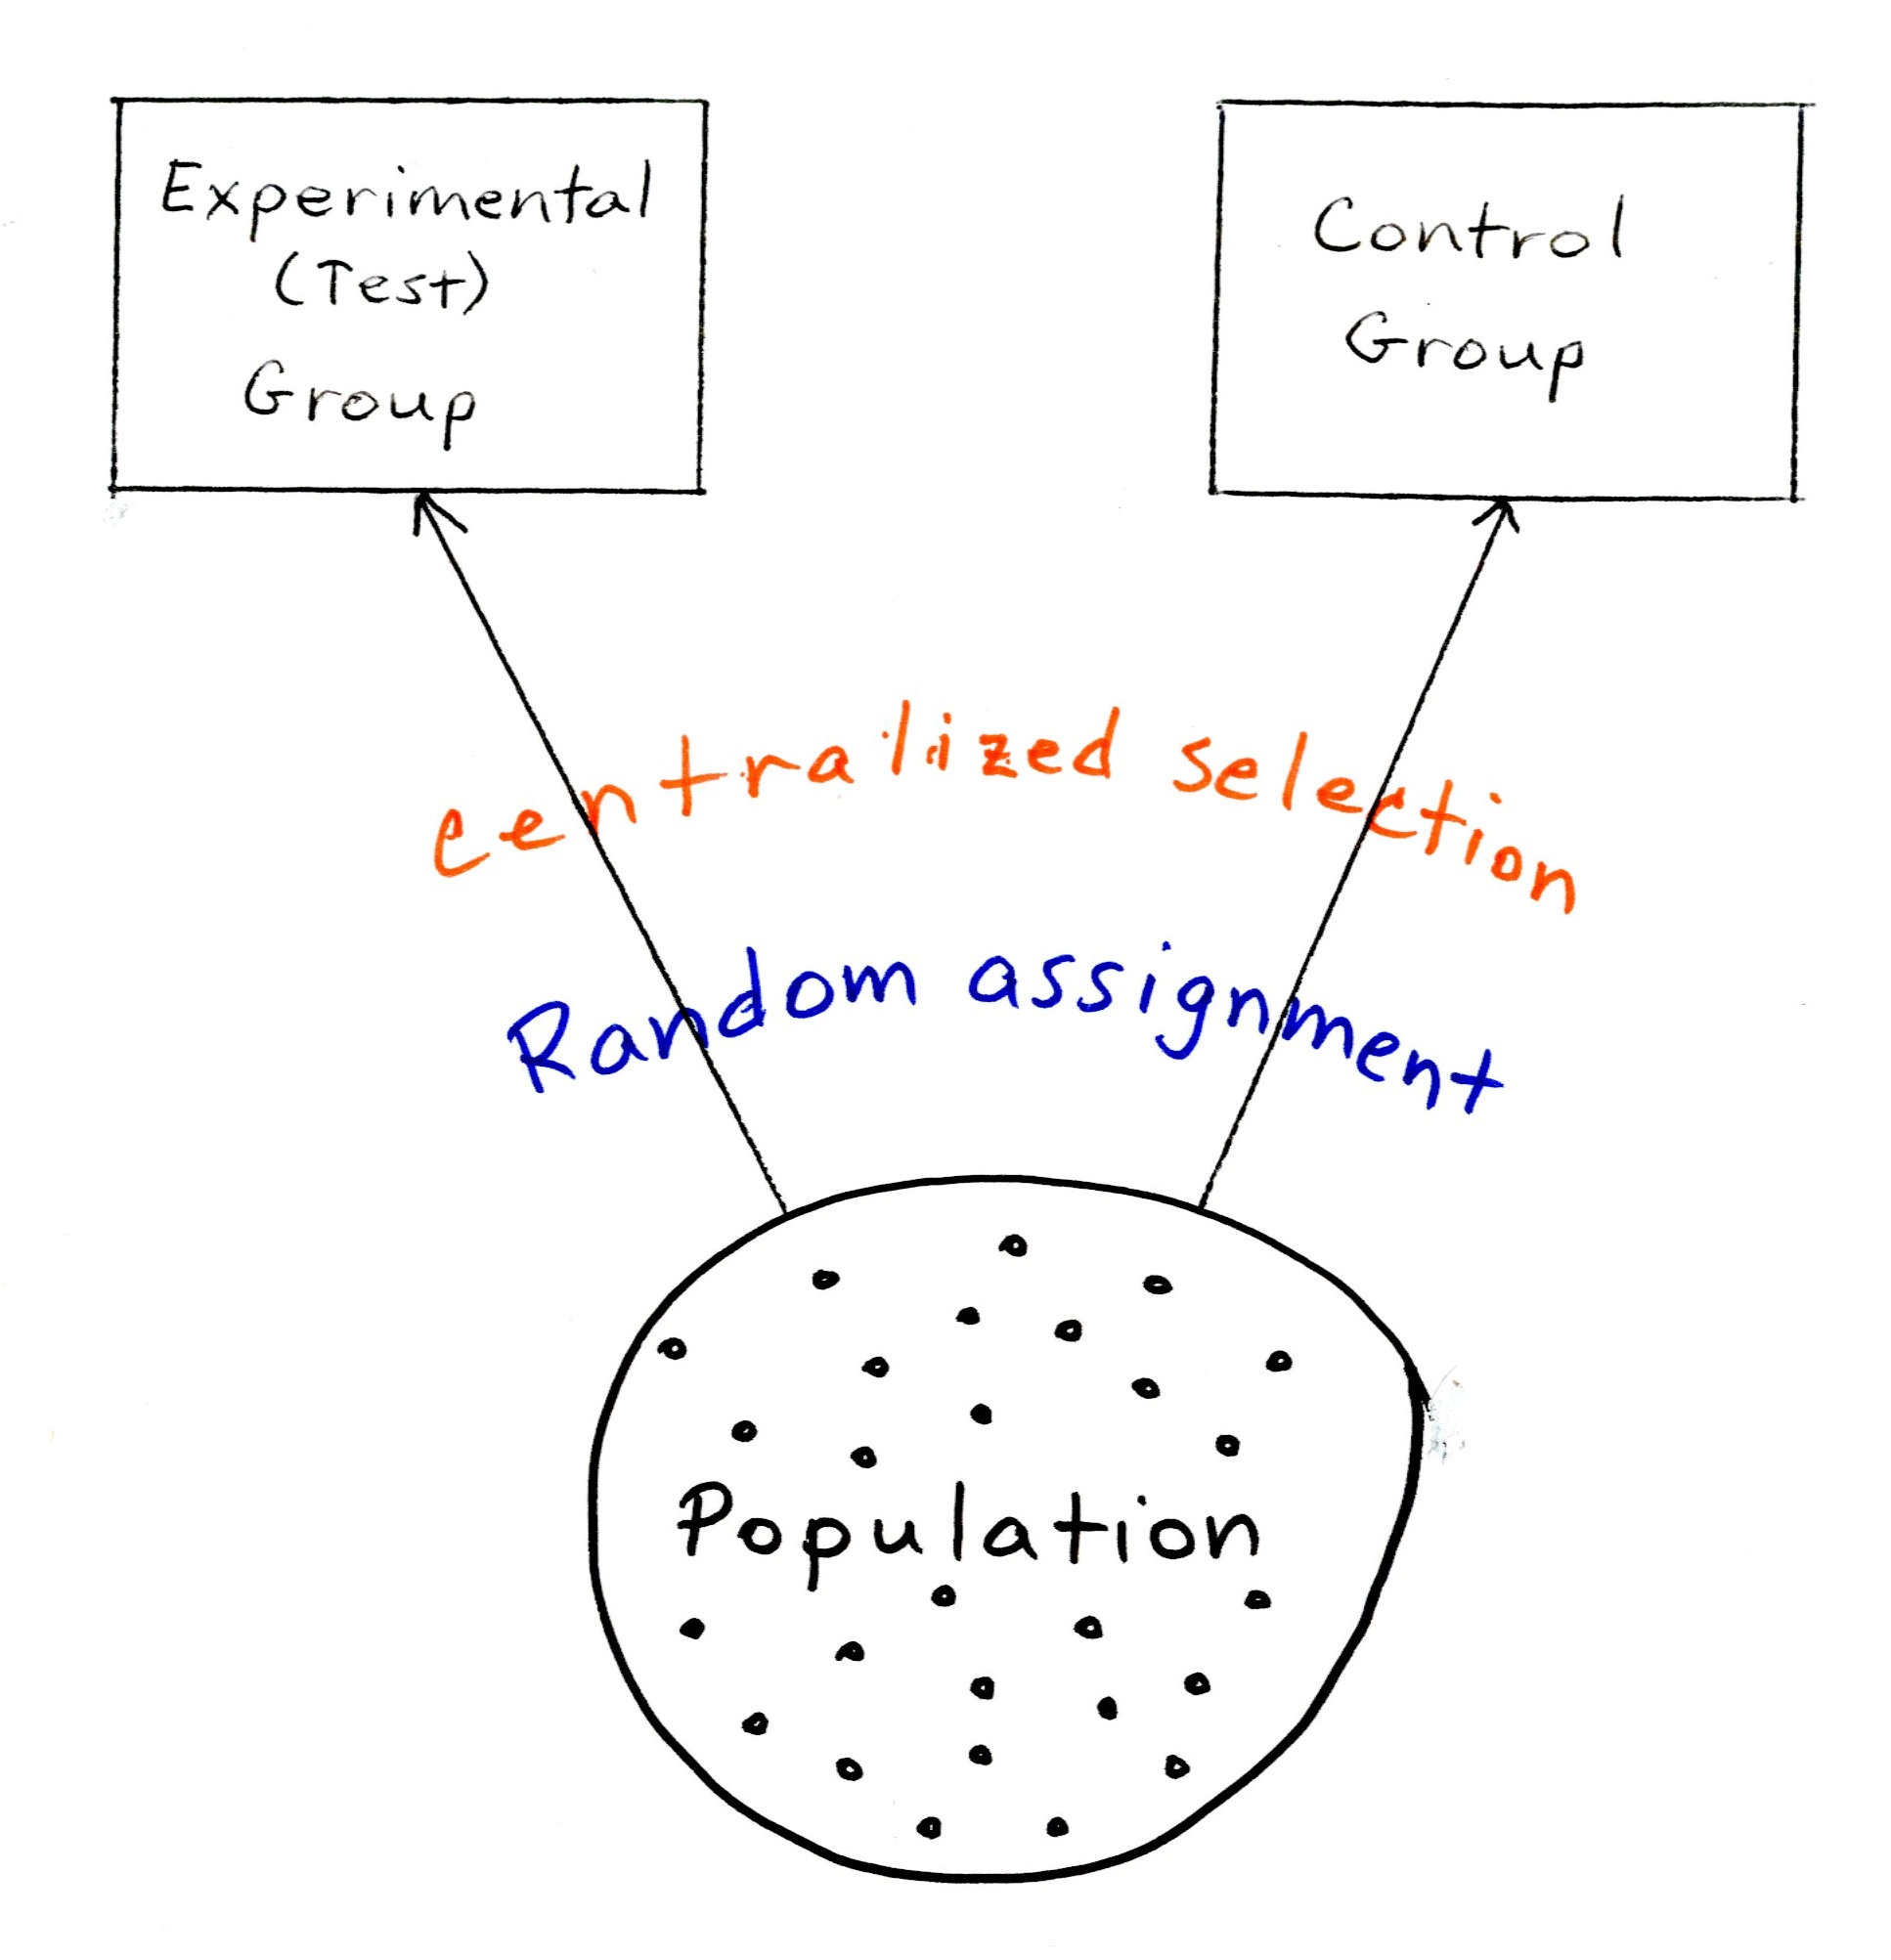 Selection of sample groups